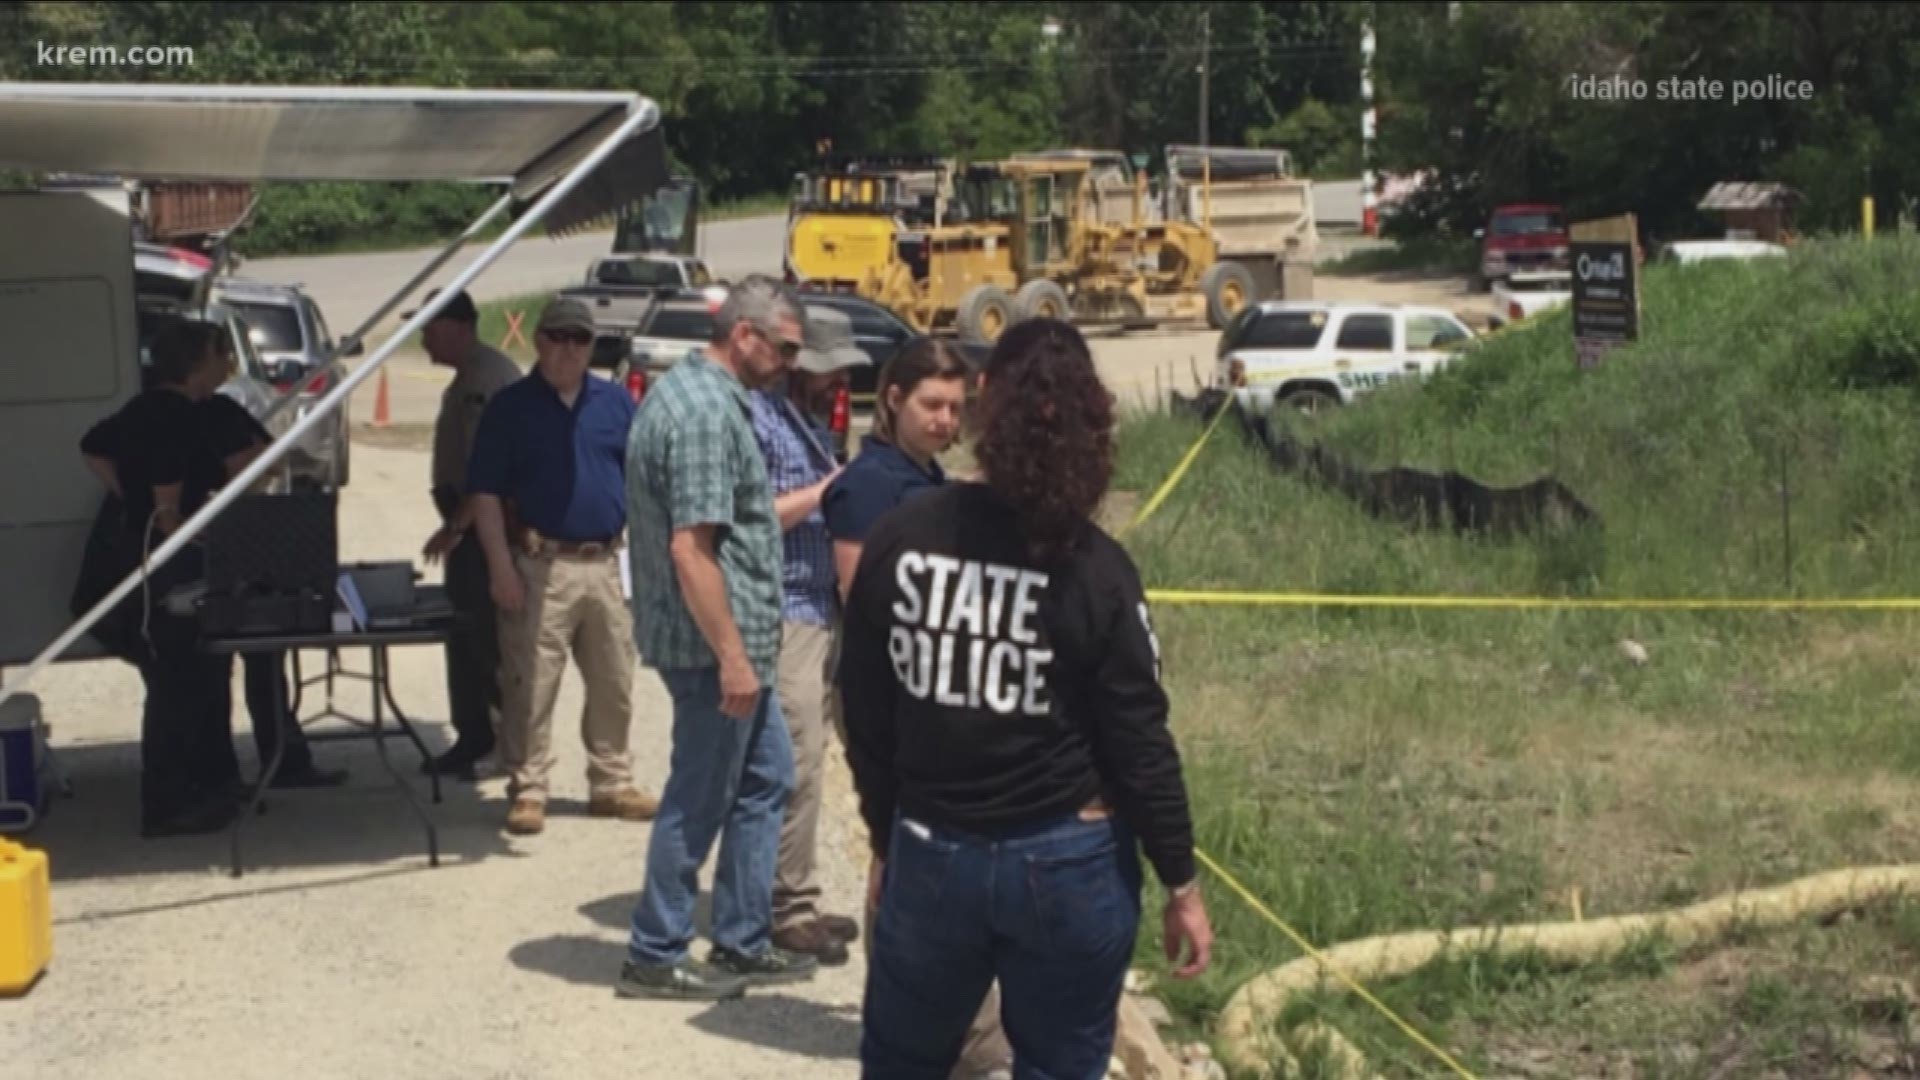 Idaho State Police and the Shoshone County Sheriff's Department responded to a report of human remains found in Kingston on Thursday.